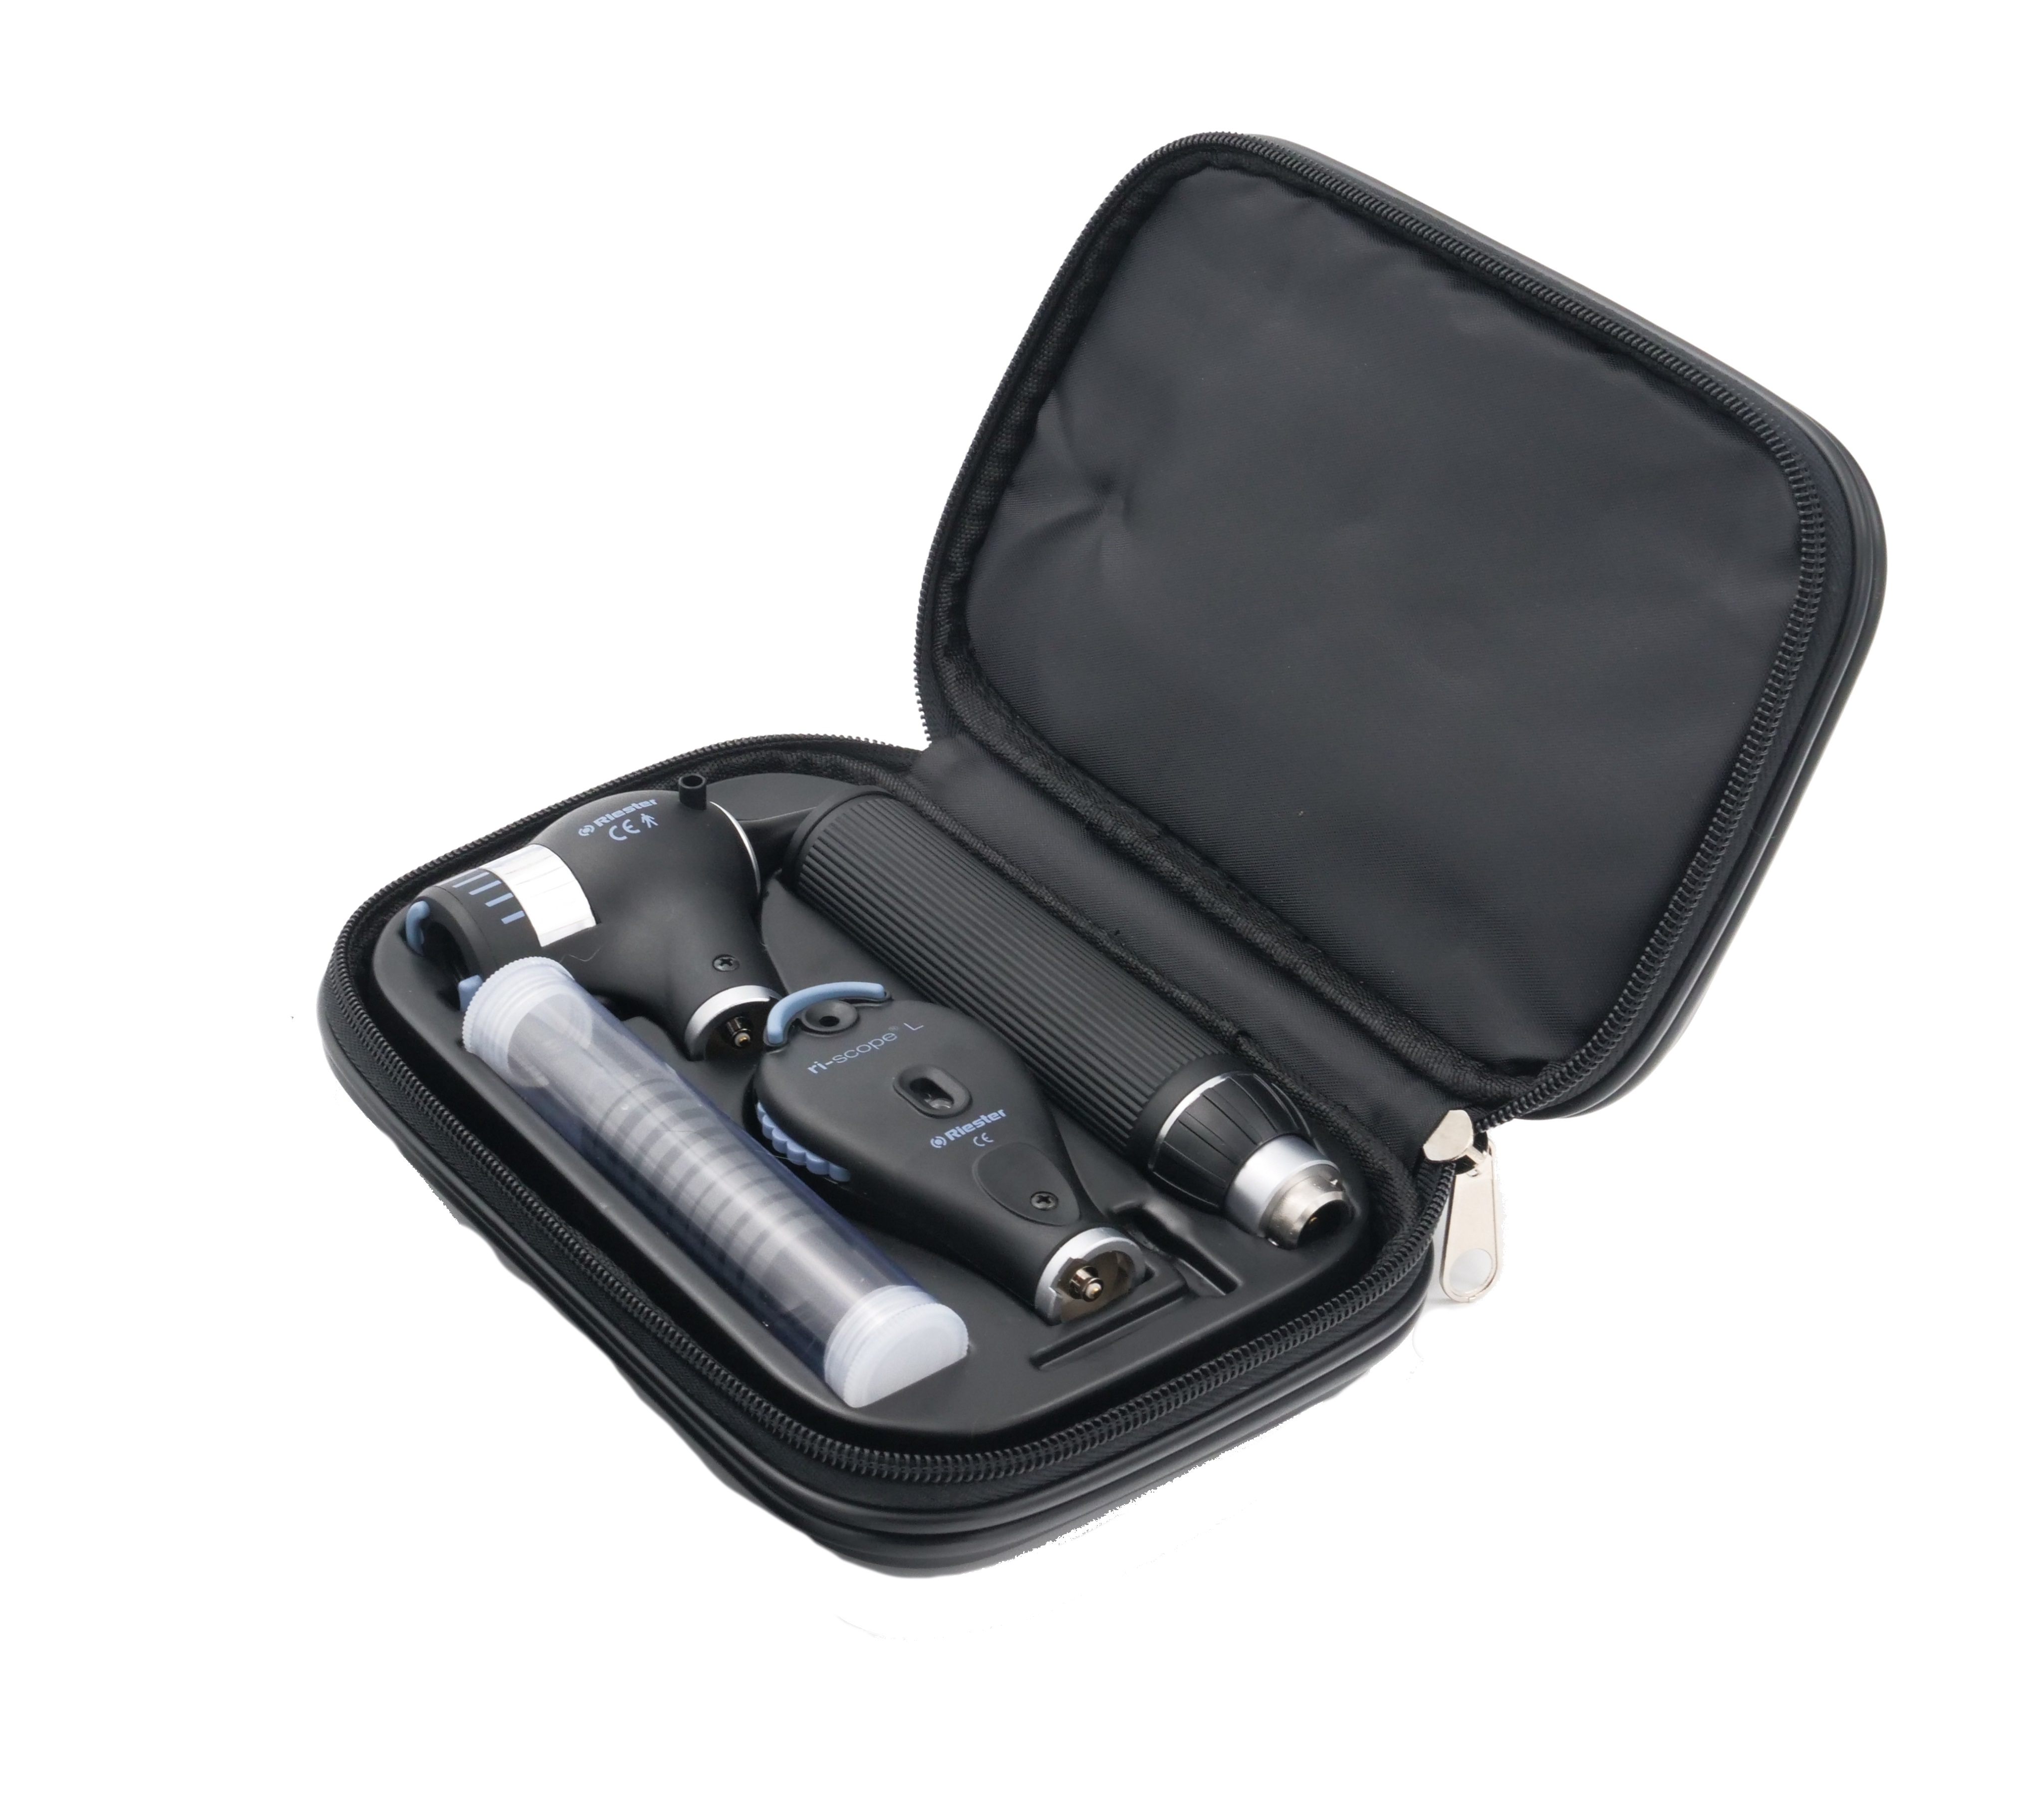 Riester Ri-scope set L2 LED Ophthalmoscope and EliteVue Otoscope 3.5V in Carry Case image 0